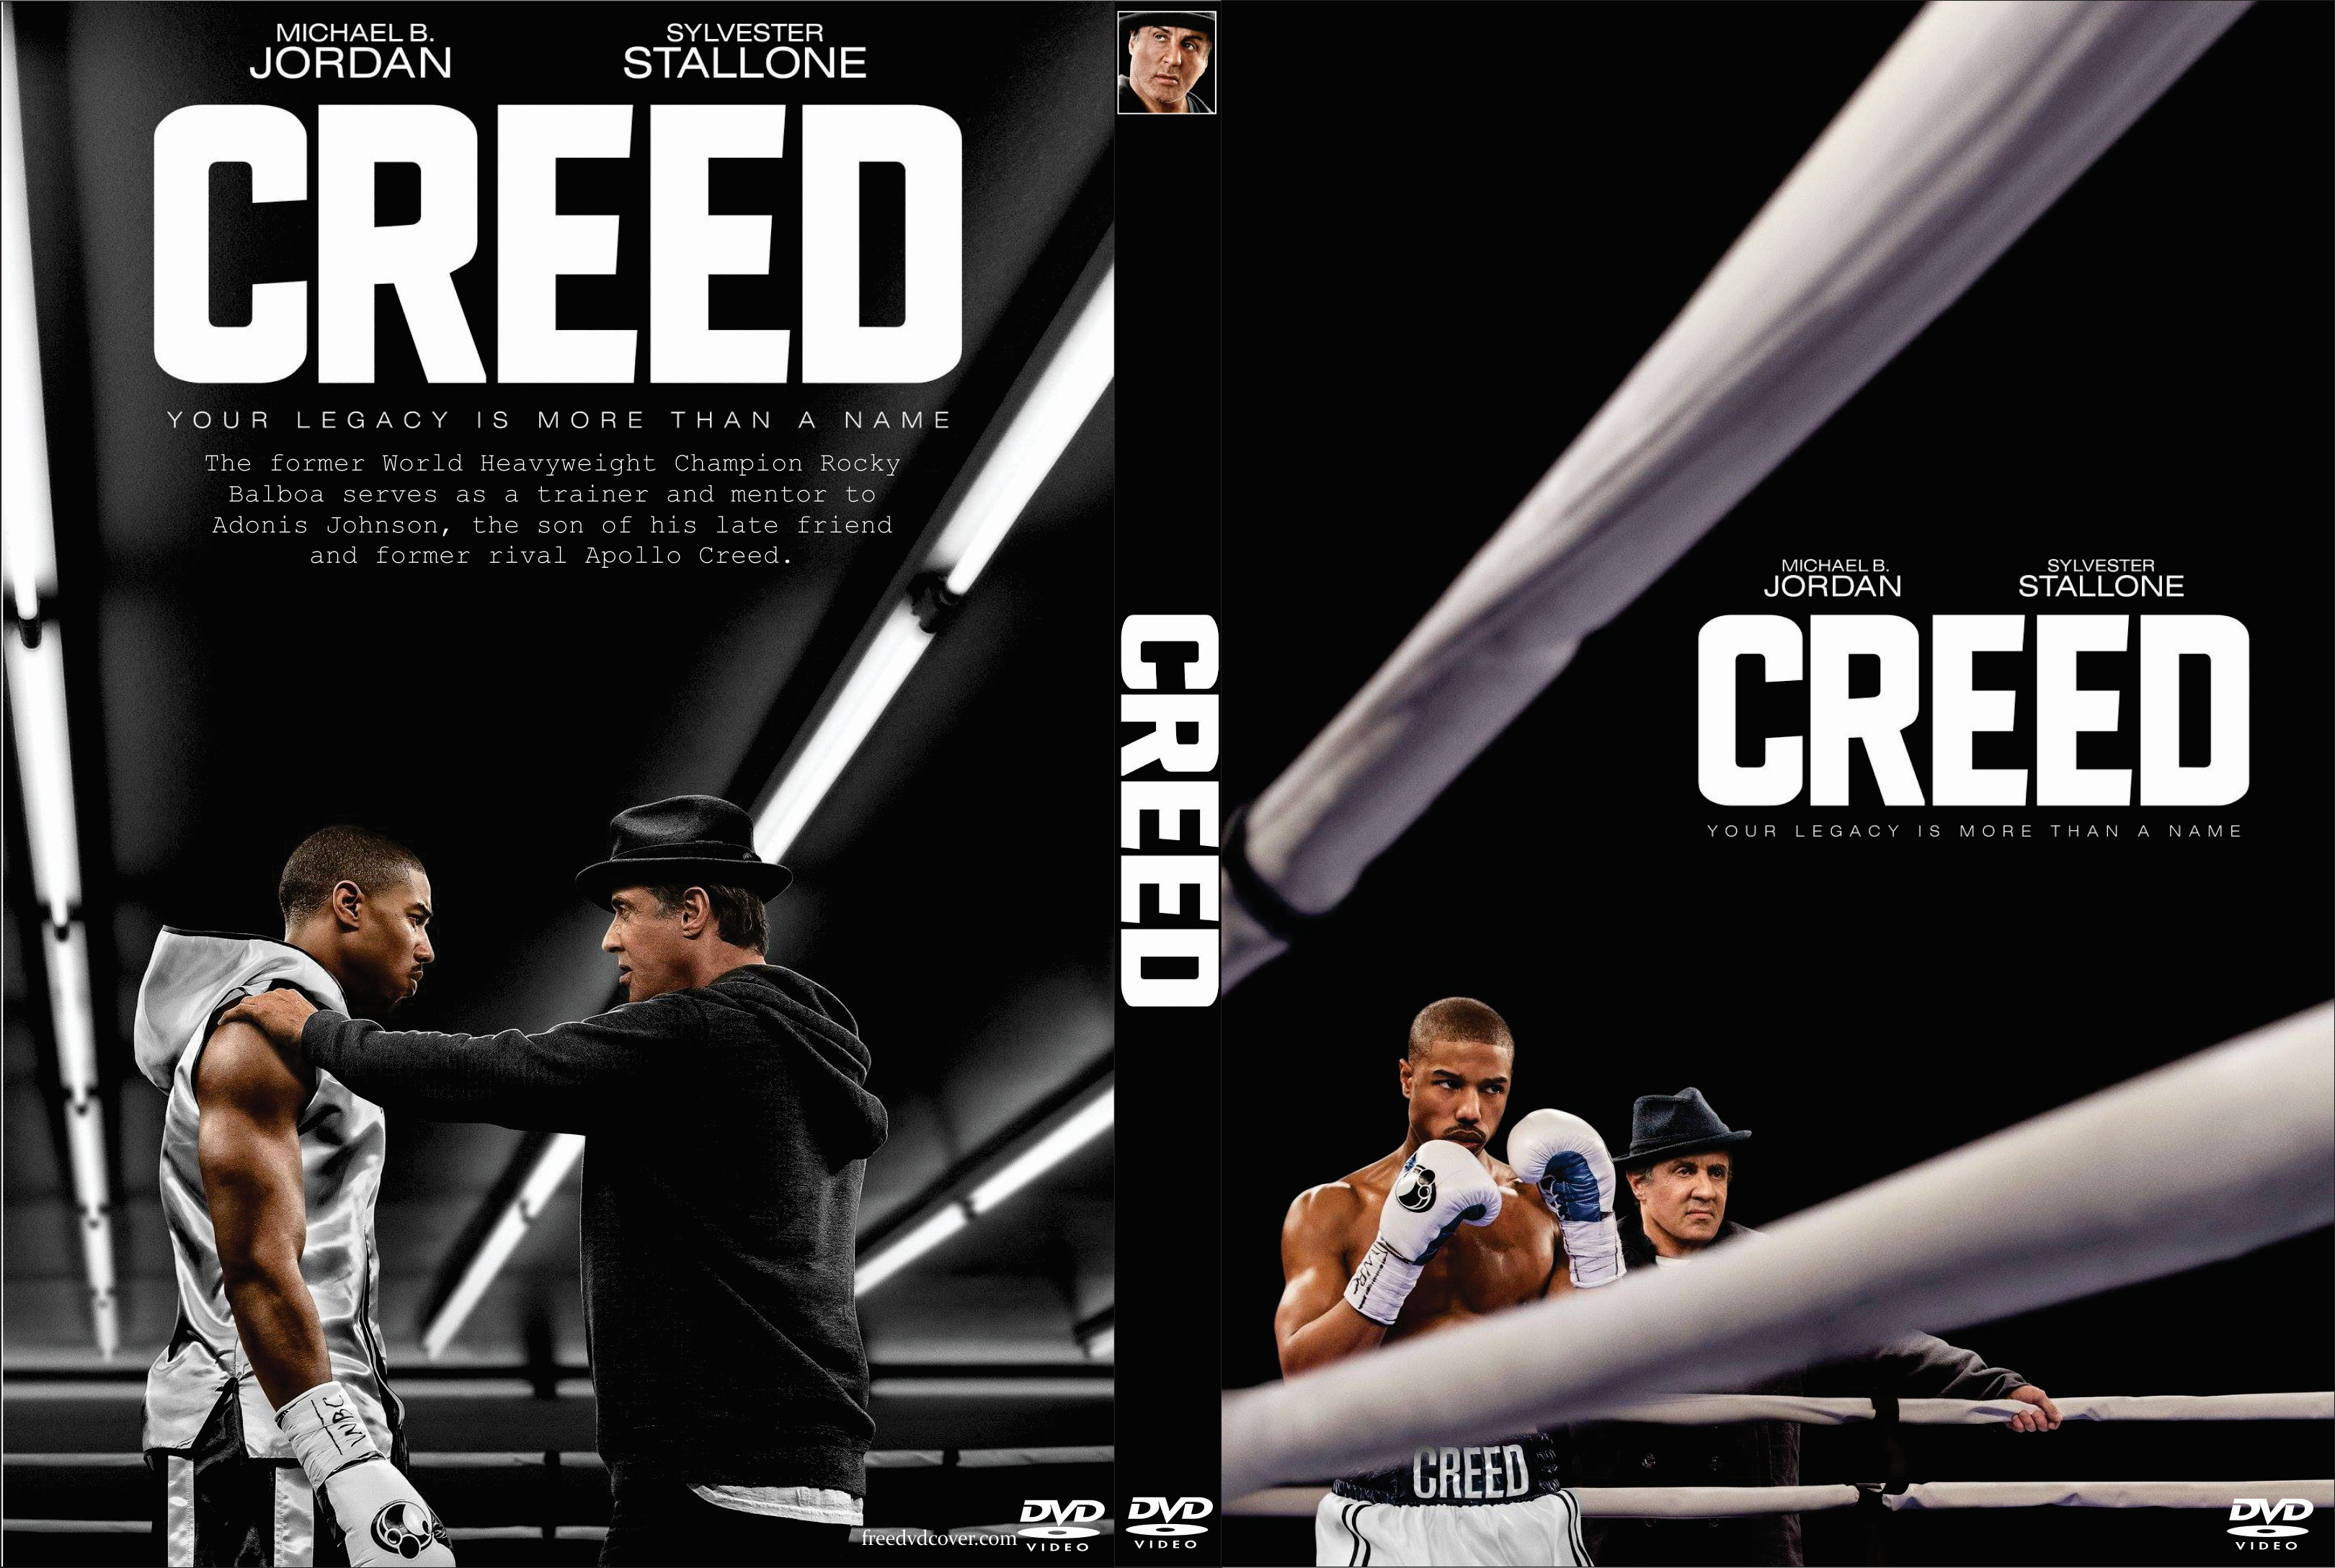 Creed soundtrack. Creed 2015. Крид наследие. Крид: наследие Рокки (2015) обложка. Крид наследие Рокки 1.